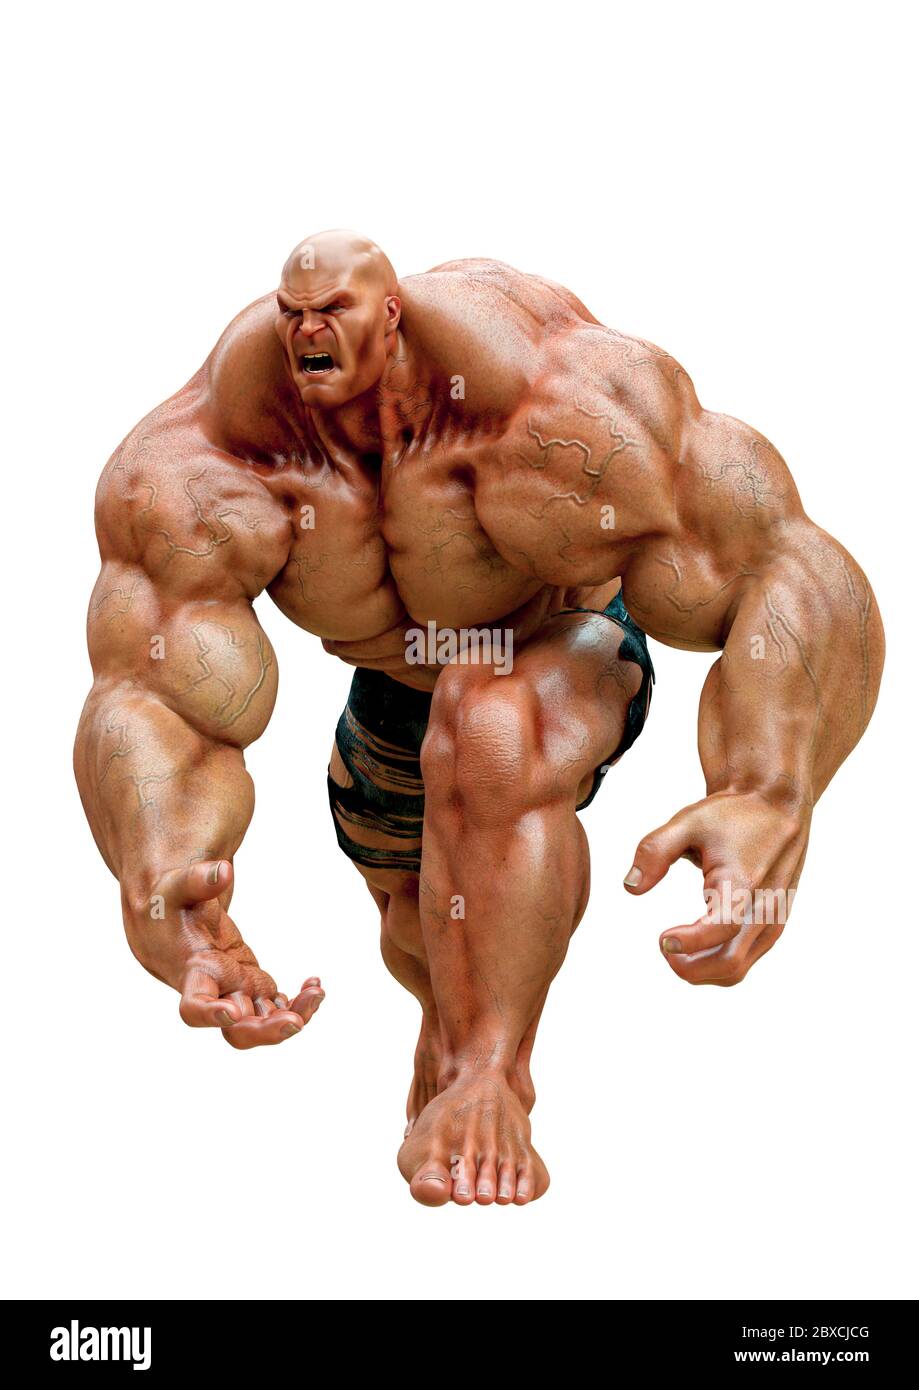 super-muscleman-will-smash-your-face-in-a-white-background-this-muscle-man-in-clipping-path-is-very-useful-for-graphic-design-creations-3d-illustrat-2BXCJCG.jpg